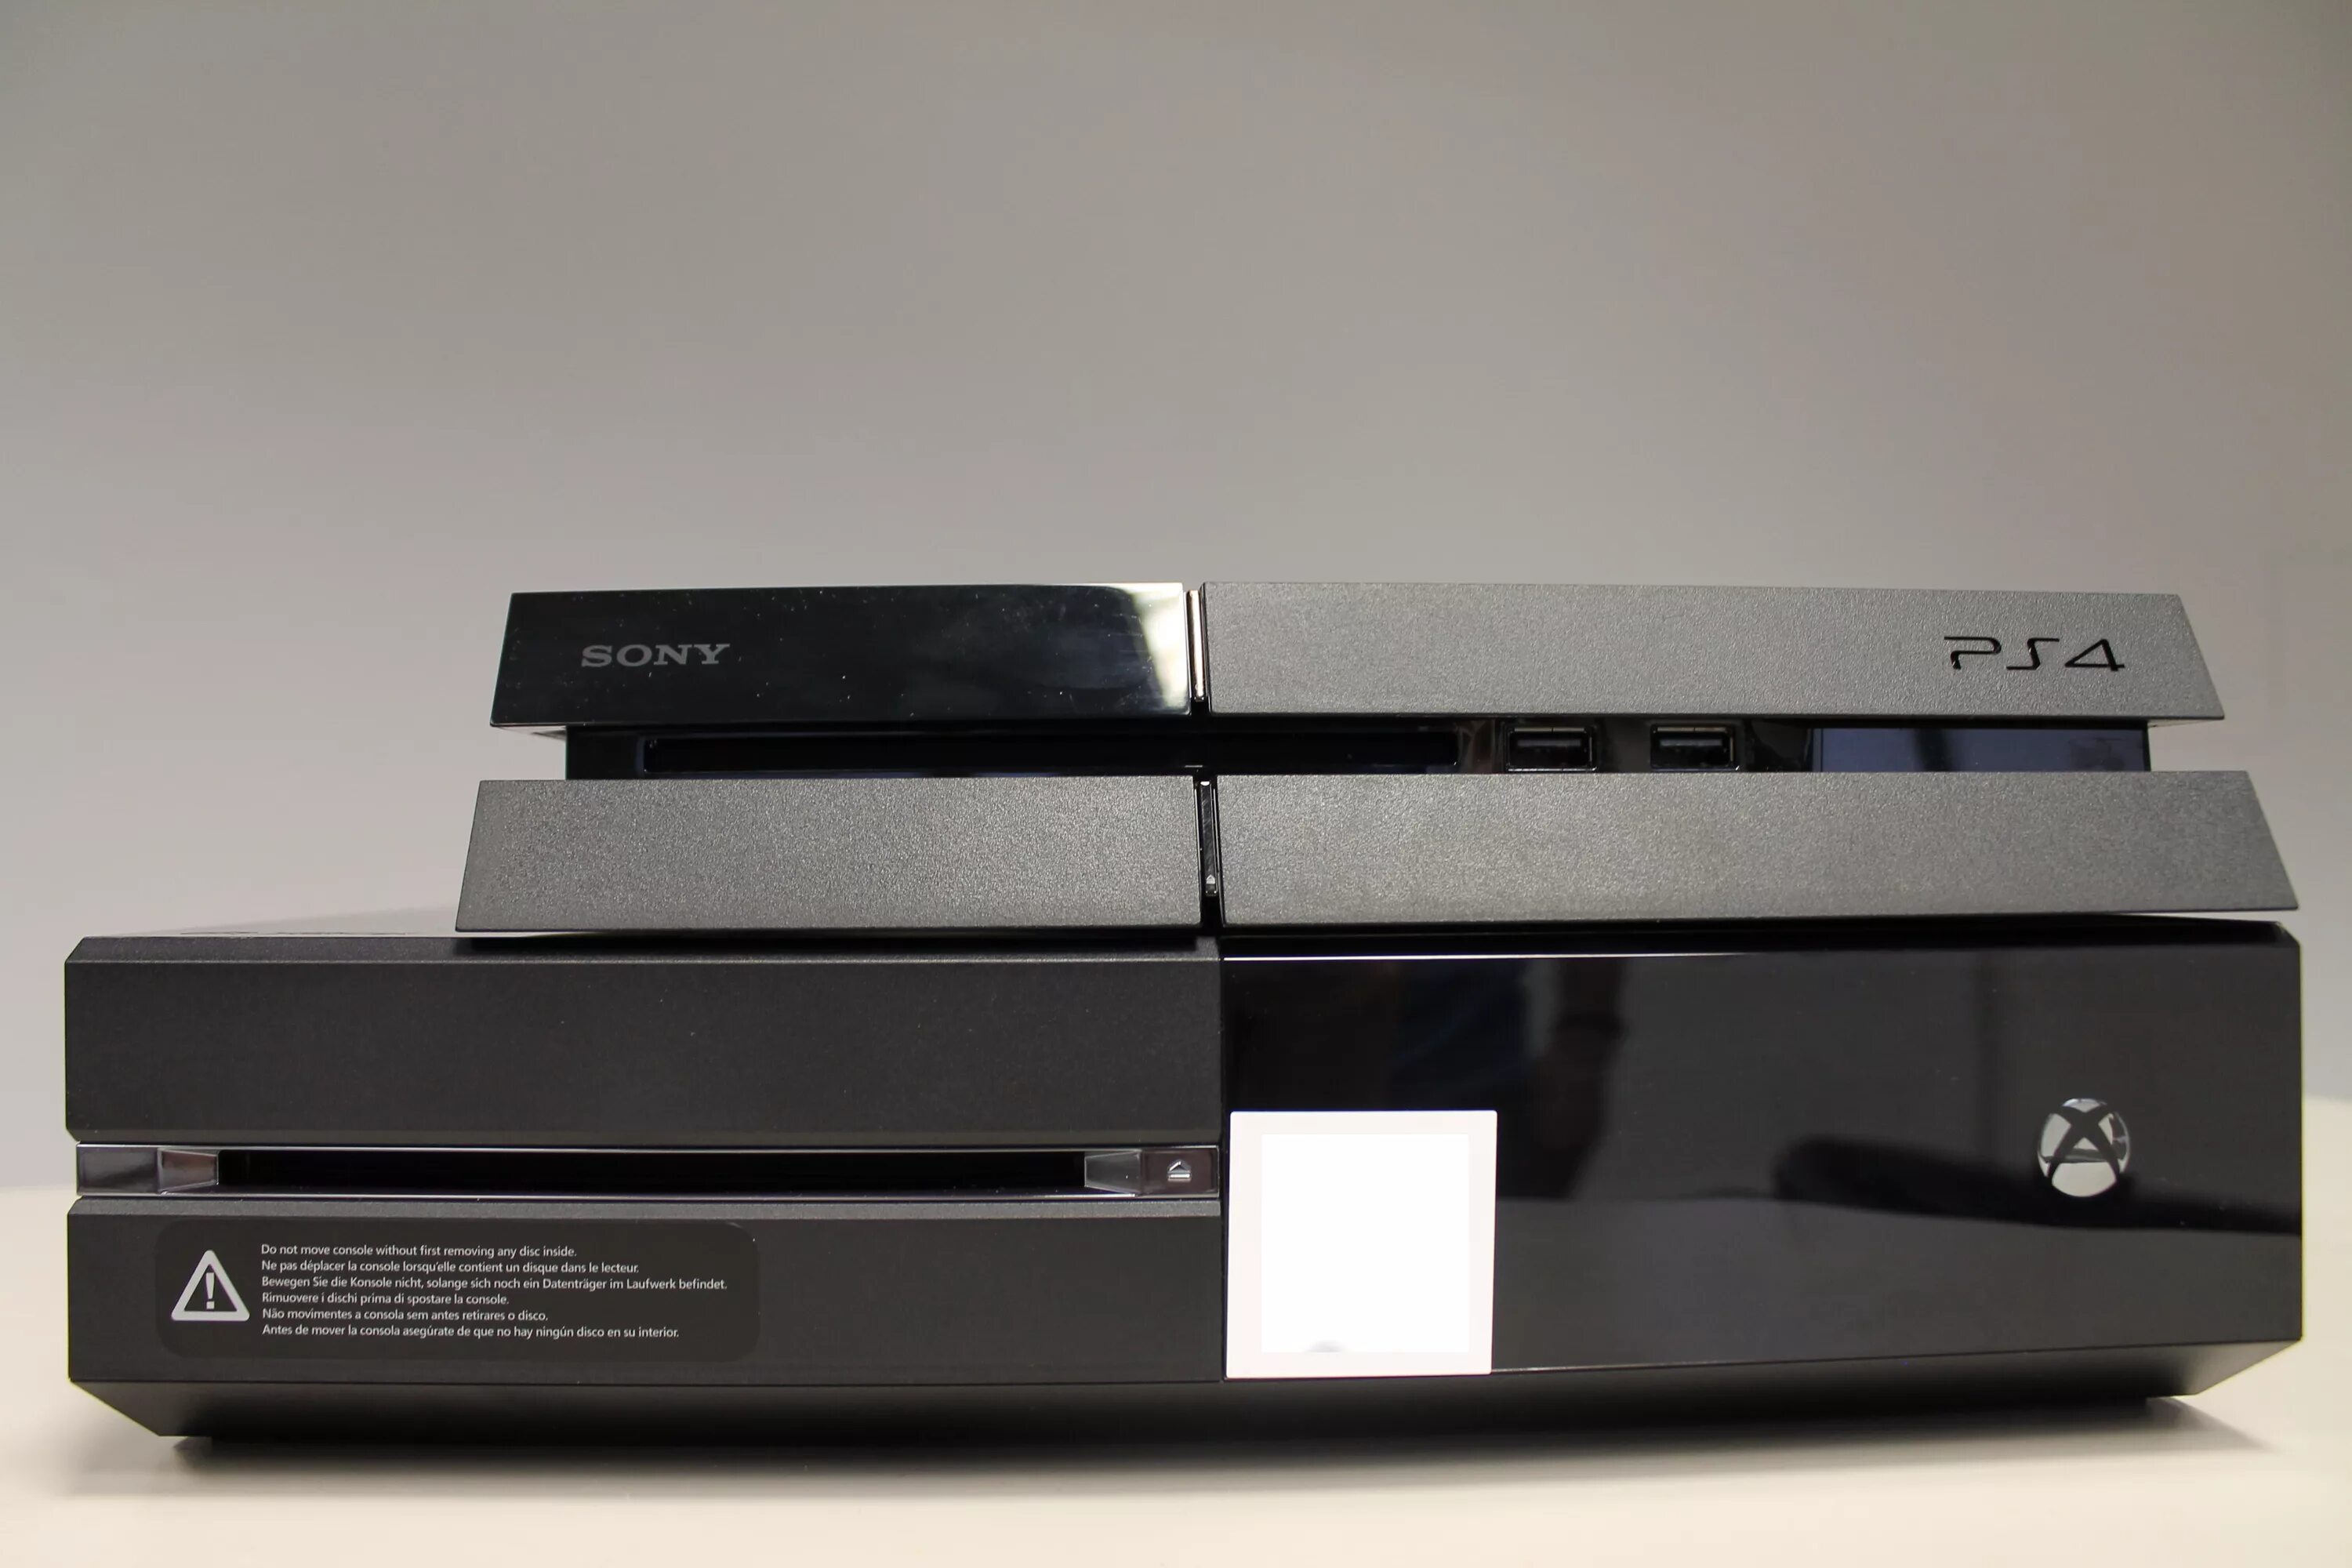 Ps4 Xbox one. Габариты пс4 фат. ПСП 4 фат. Xbox one fat. Www ps4